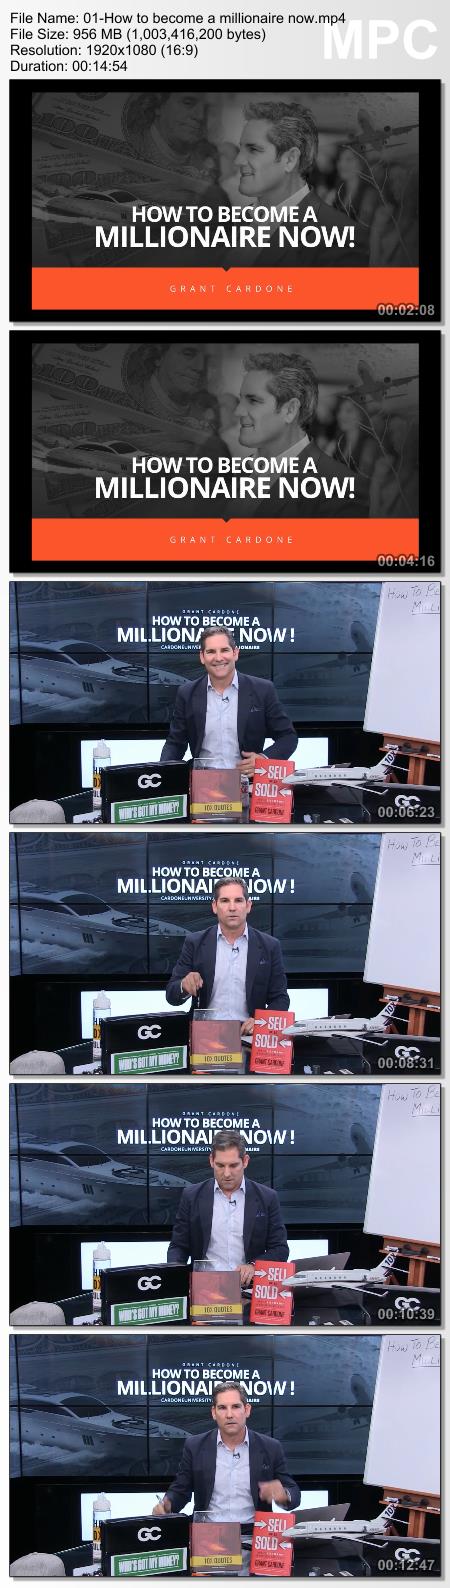 Grant Cardone - How To Become A Millionaire Now